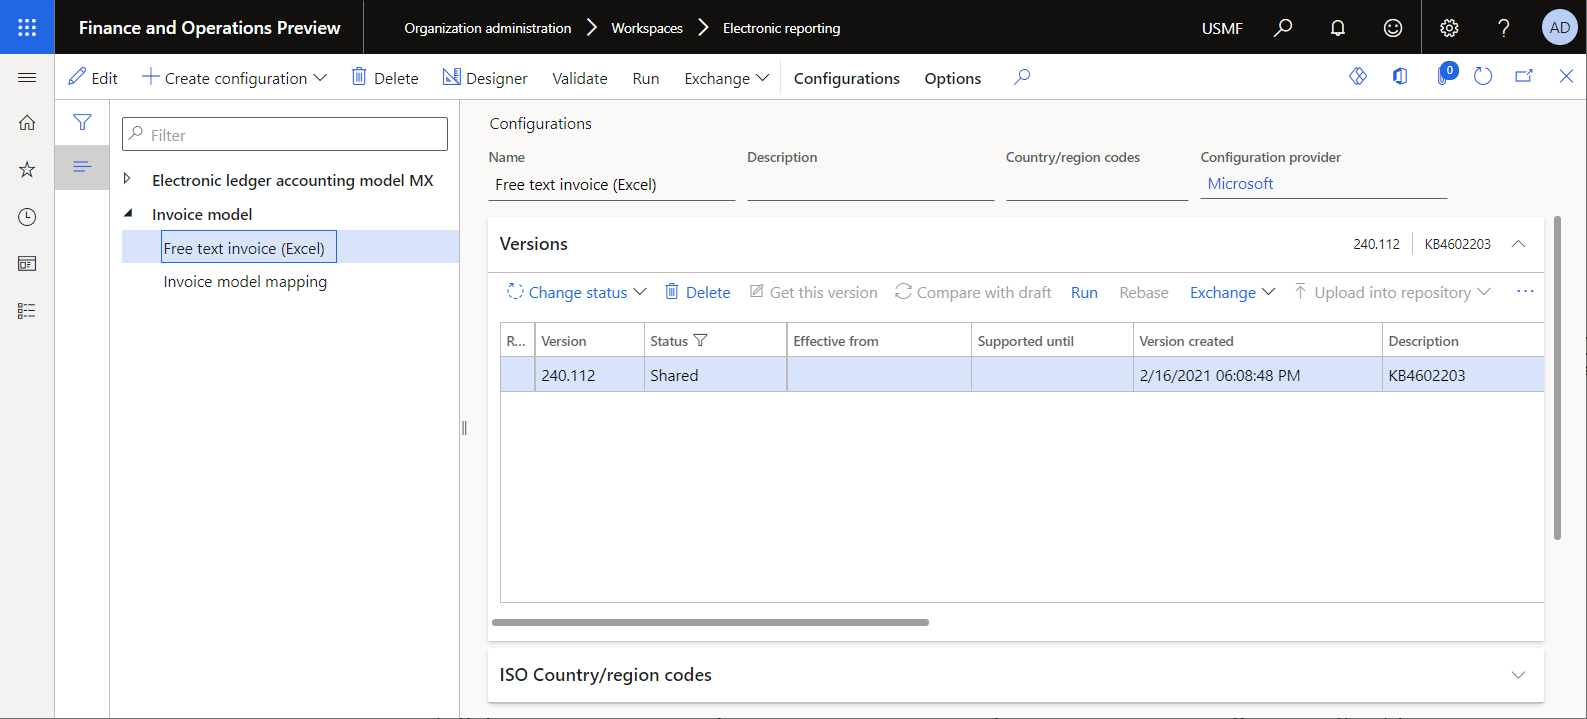 Imported ER configurations on the Configurations page.